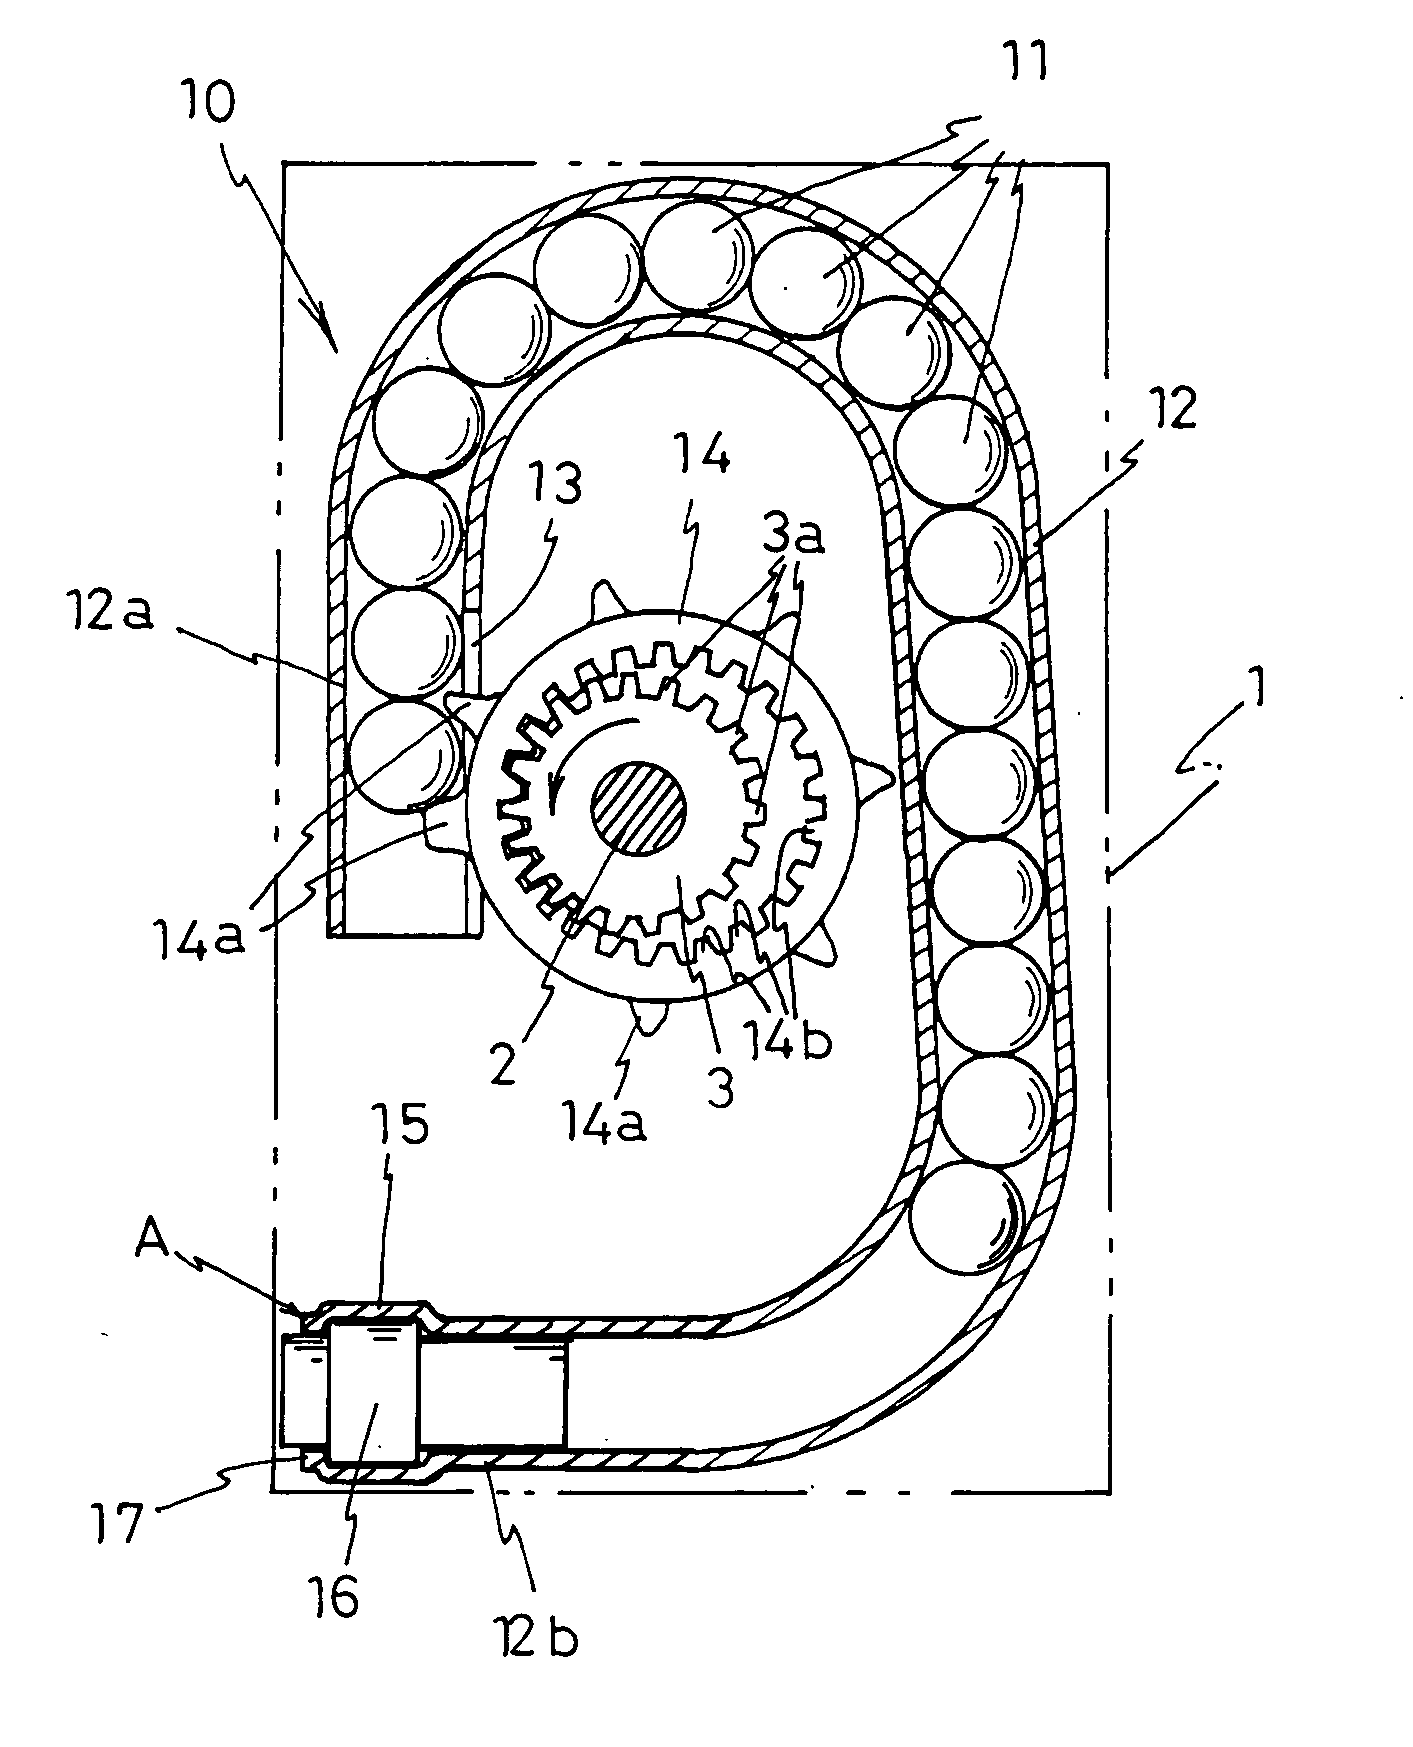 Structure and method for the affixing of a pretensioner gas generator